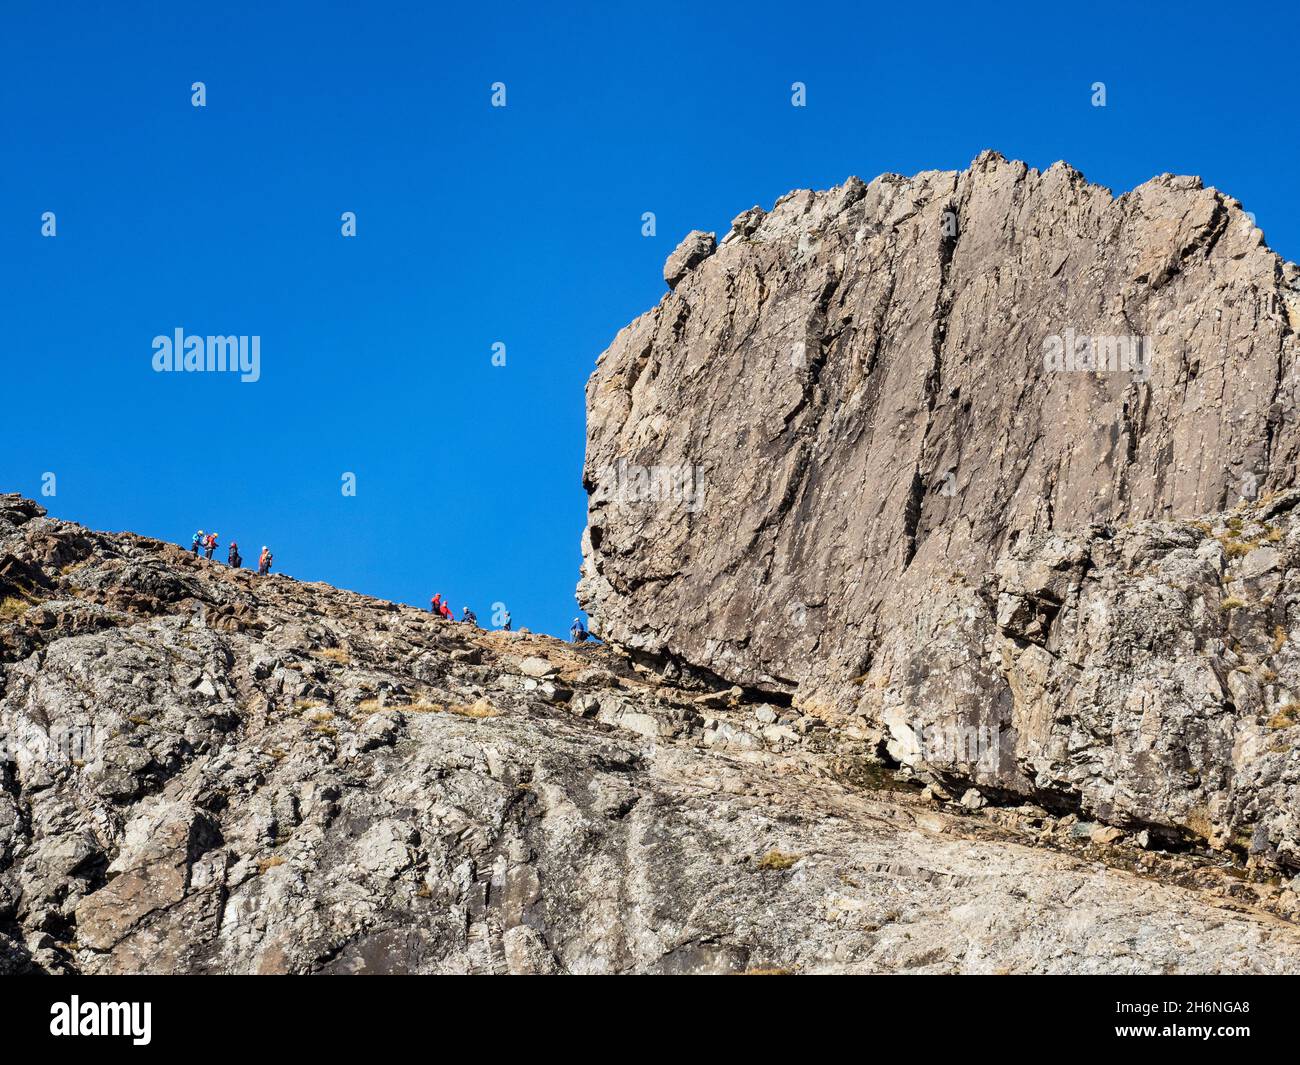 Climbers below the Inaccessible Pinnacle on Sgurr Dearg on the Cuillin Ridge on the Isle of Skye, Scotland, UK. The In Pin is the hardest of all Scotl Stock Photo